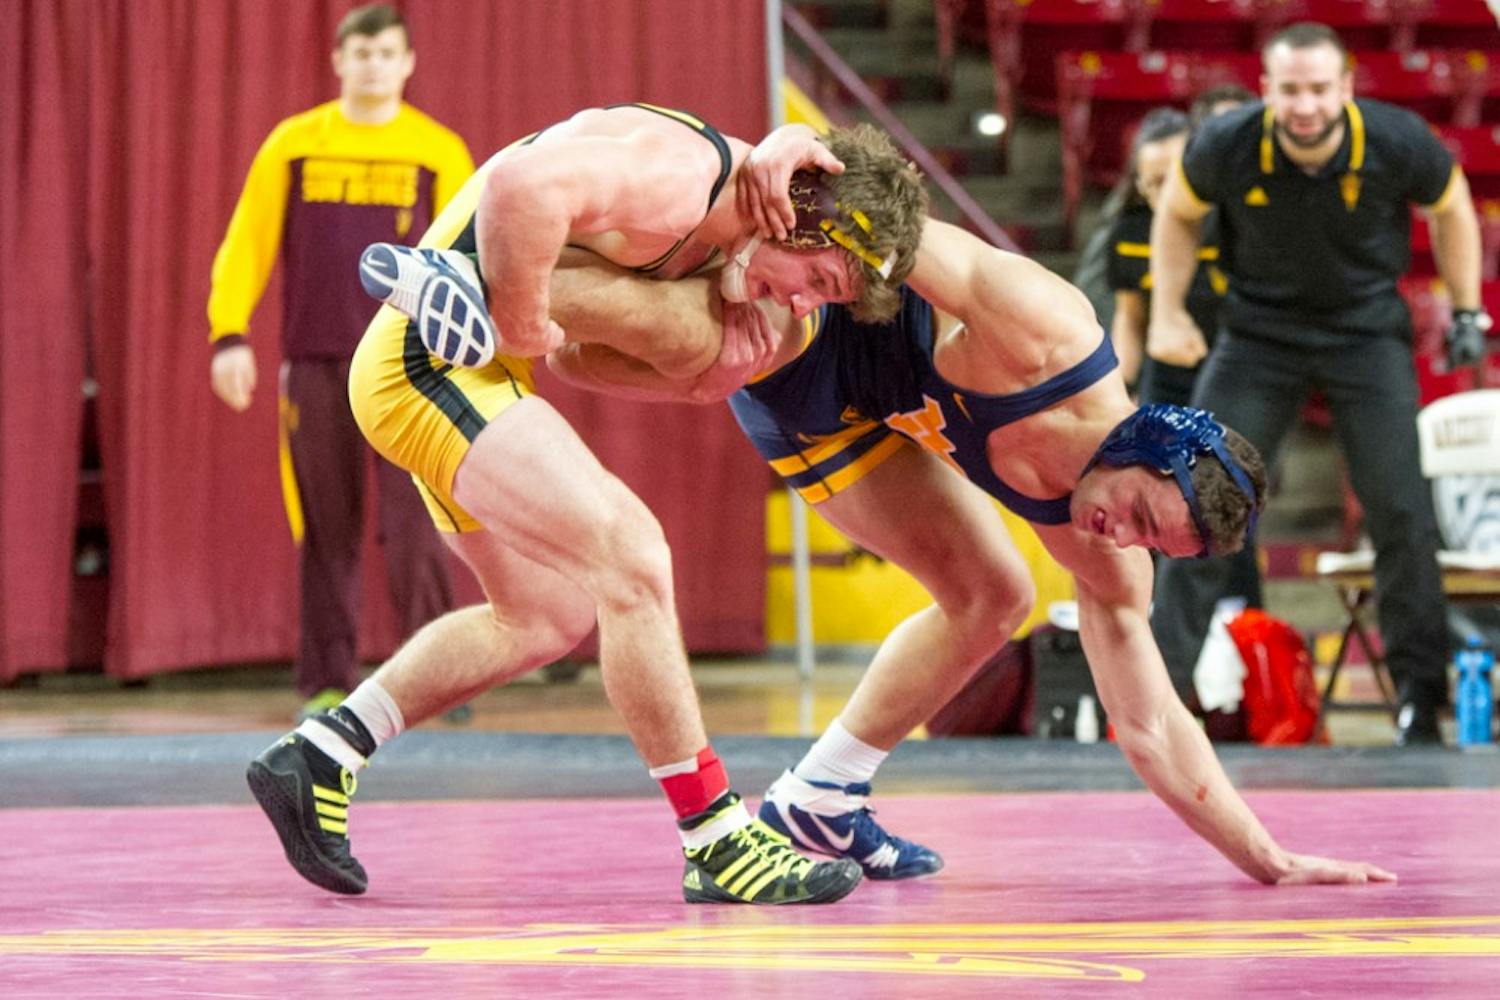 After four rounds of overtime, Jacen Peterson takes the match from WVU's Ross Renzi in a morning meet on Saturday, Jan. 23, 2016, at&nbsp; Wells Fargo Arena in Tempe, Arizona.